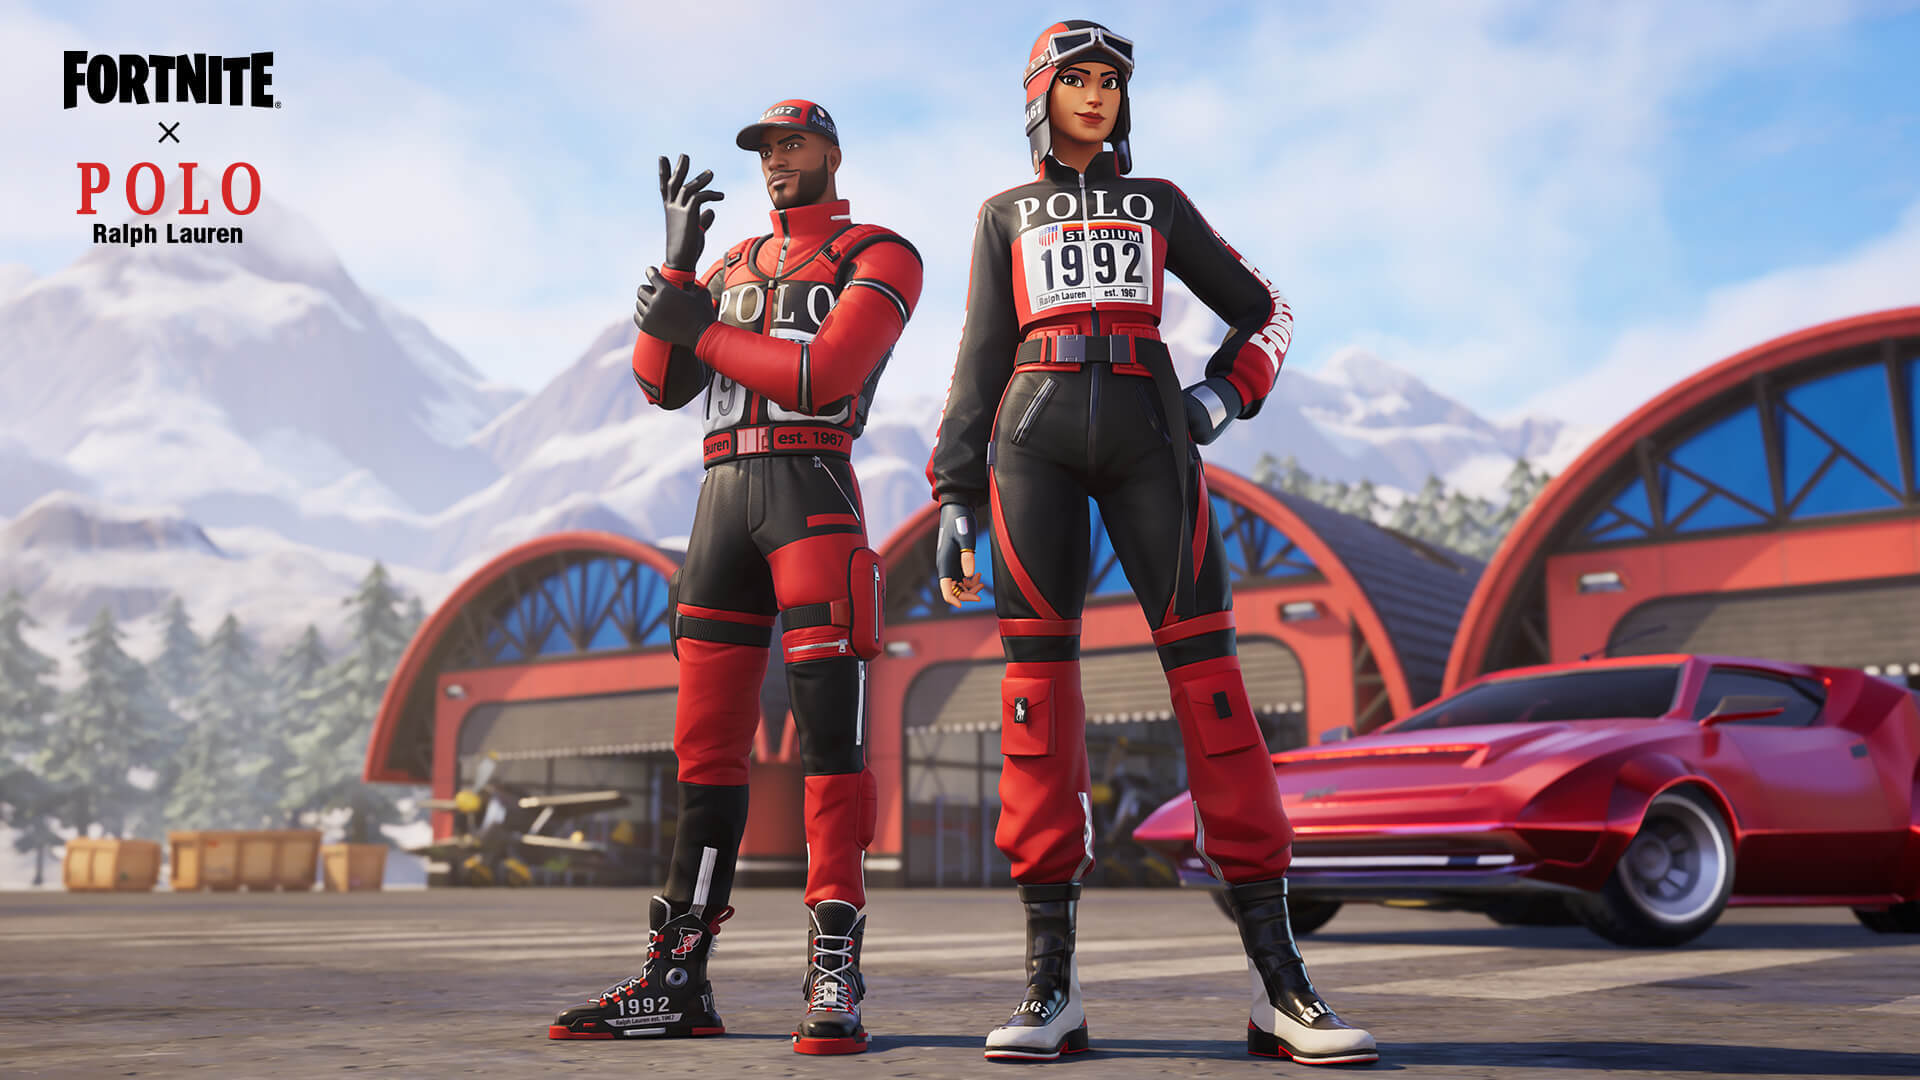 Fortnite's Polo Ralph Lauren Crossover Brings Racing Chic To Battle Royale  - GameSpot